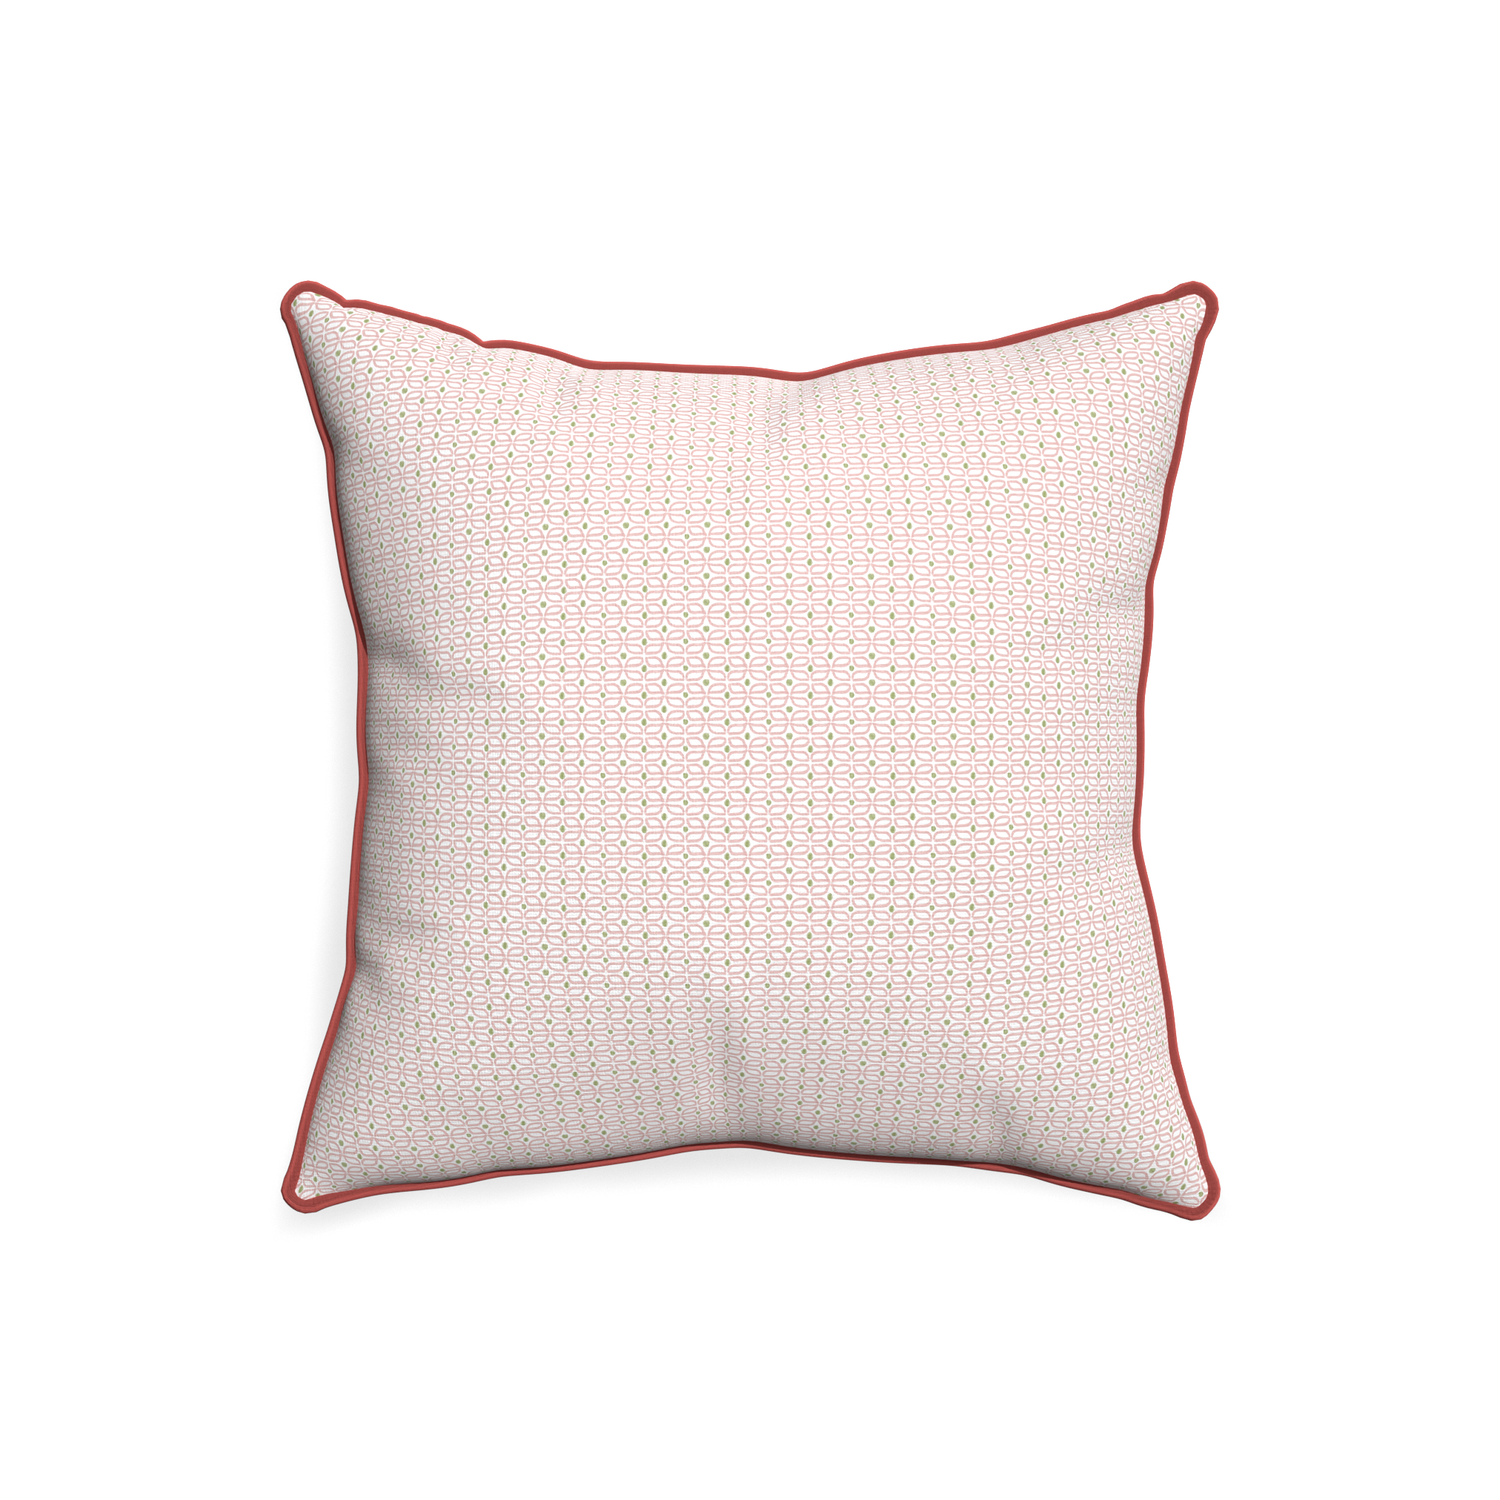 20-square loomi pink custom pillow with c piping on white background